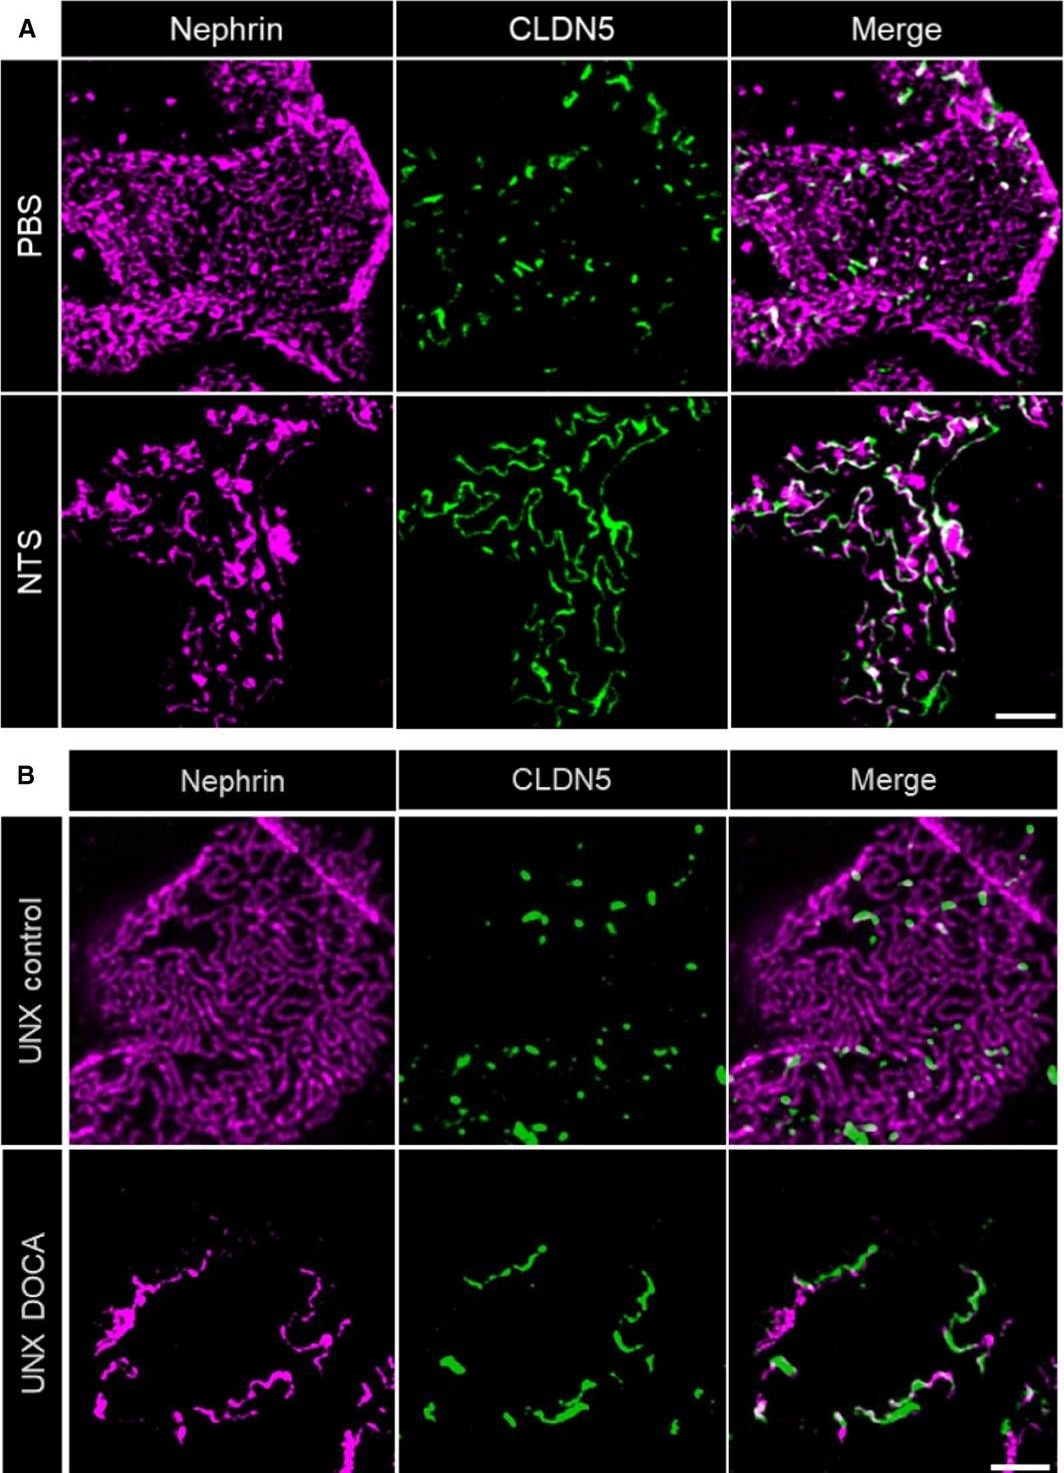 Super-resolved local recruitment of CLDN5 to filtration slits implicates a direct relationship with podocyte foot process effacement.